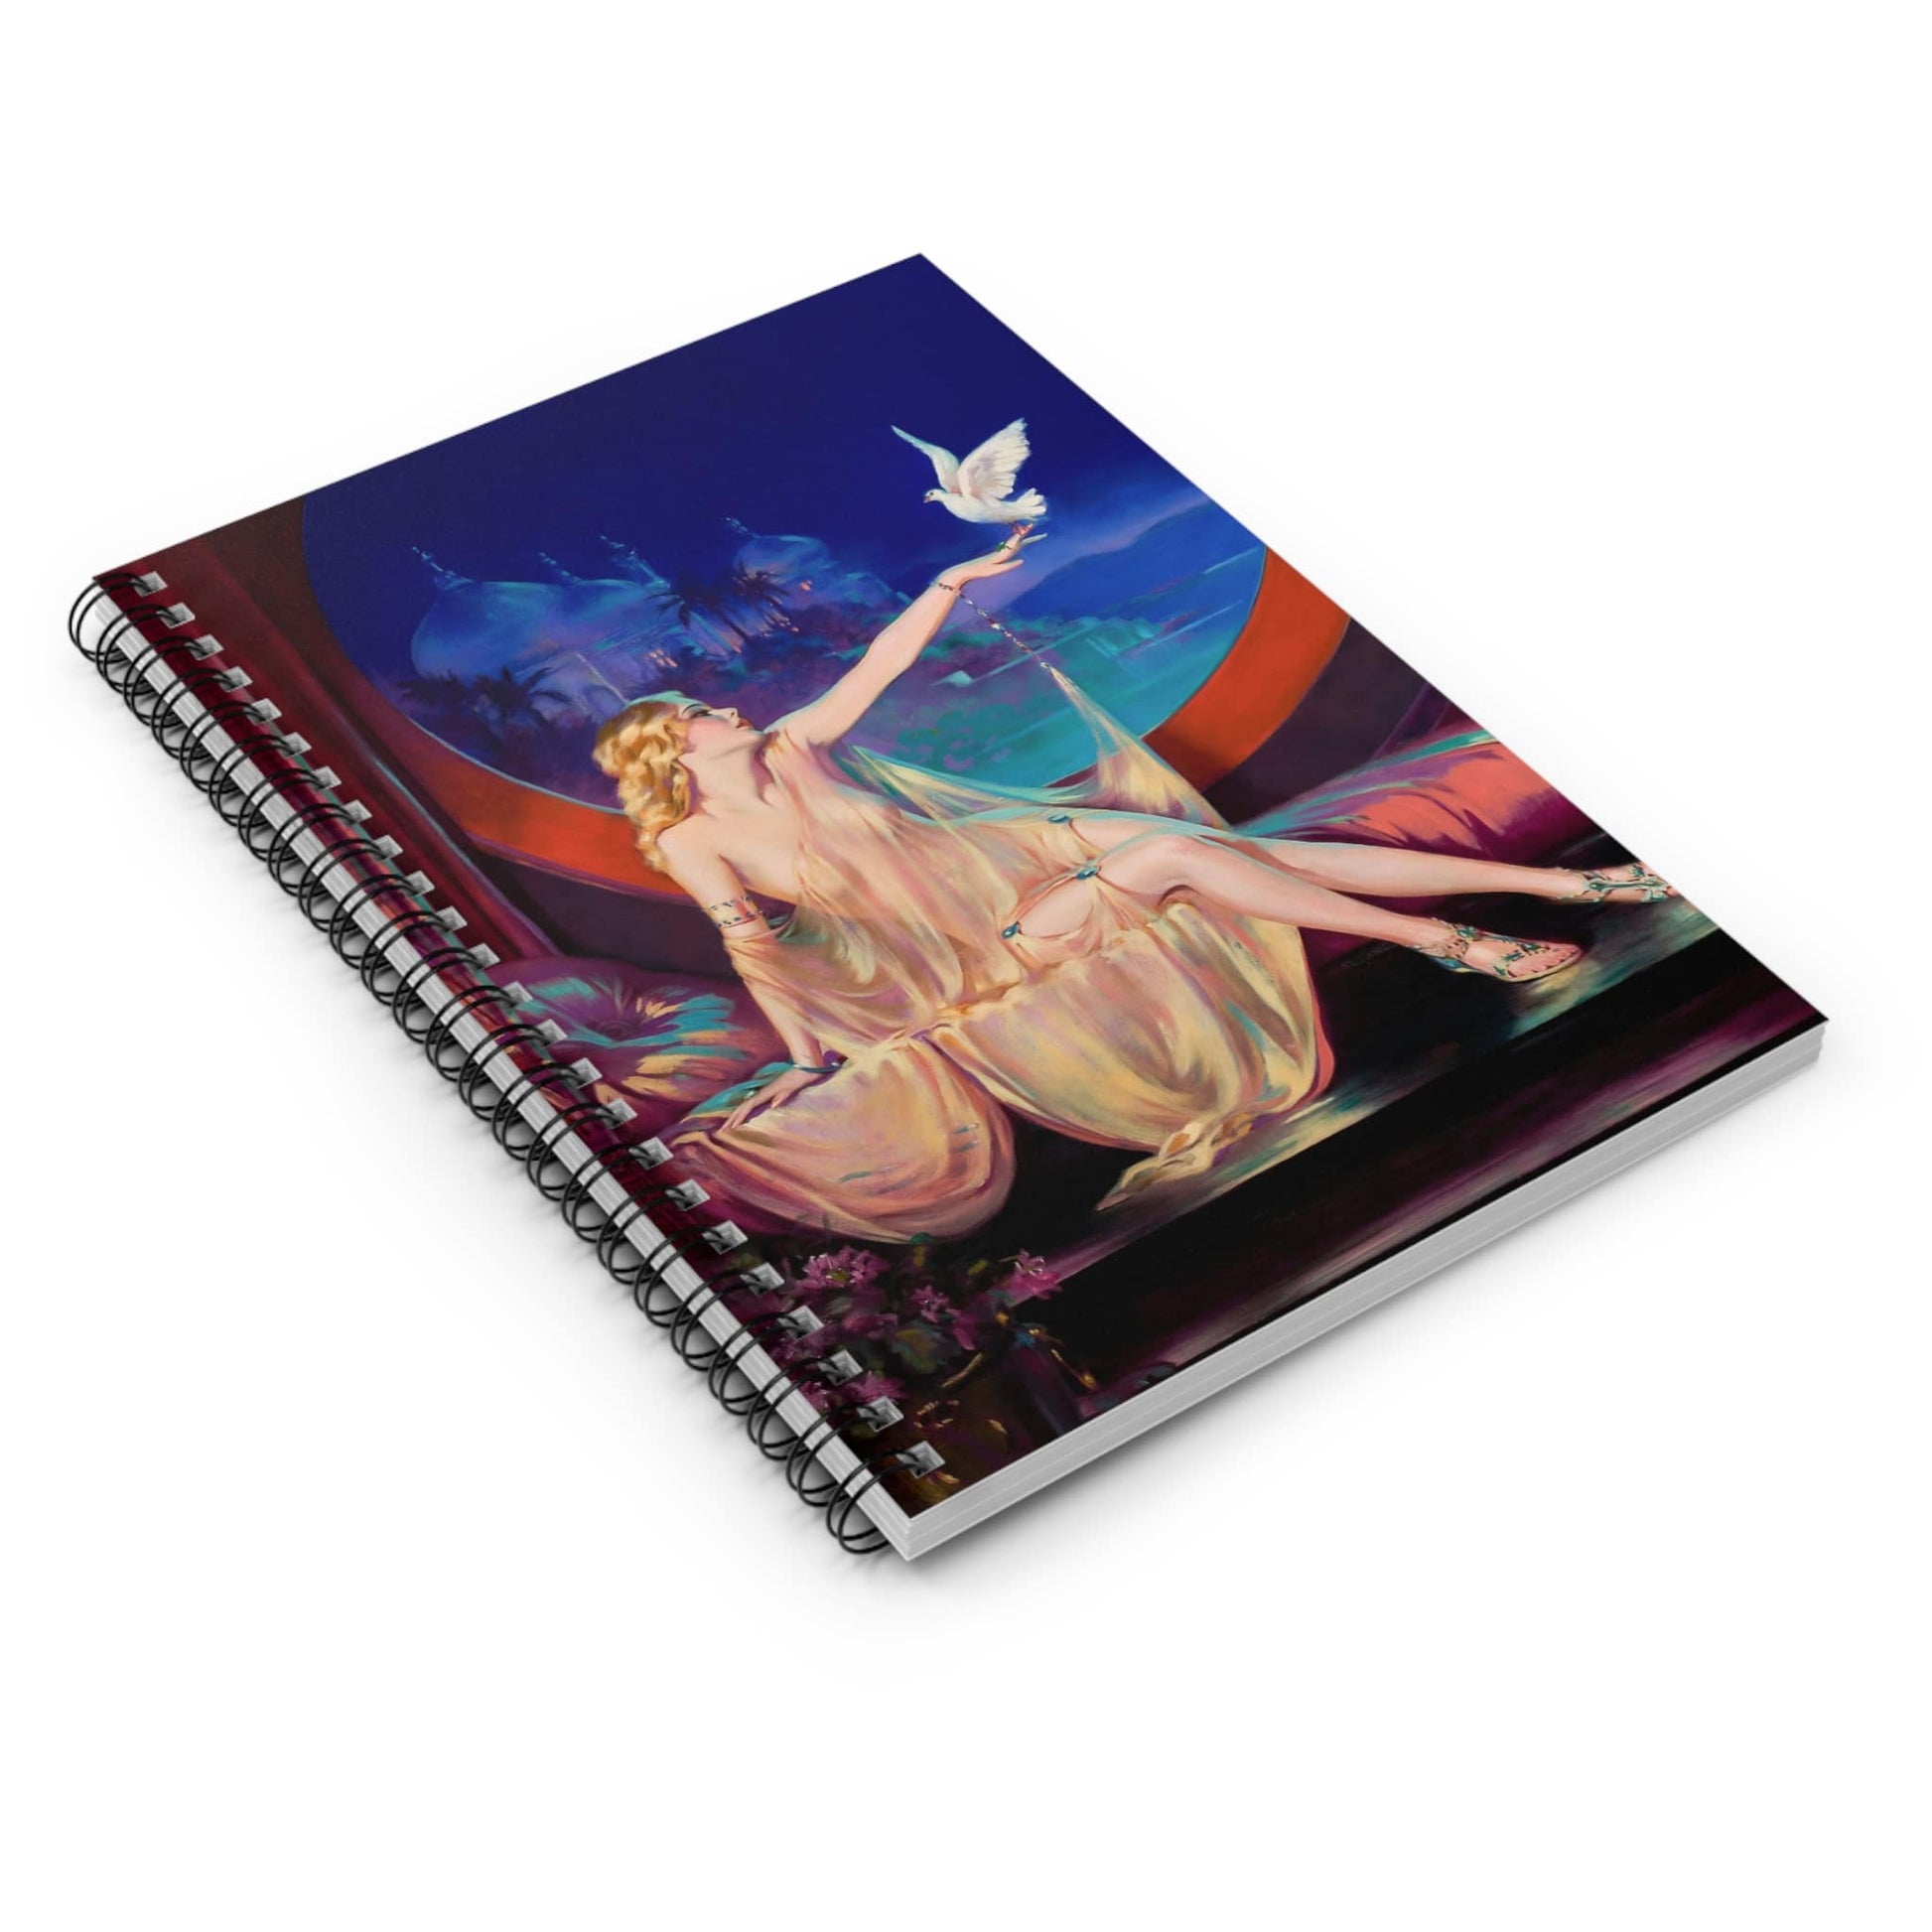 Art Nouveau Spiral Notebook Laying Flat on White Surface